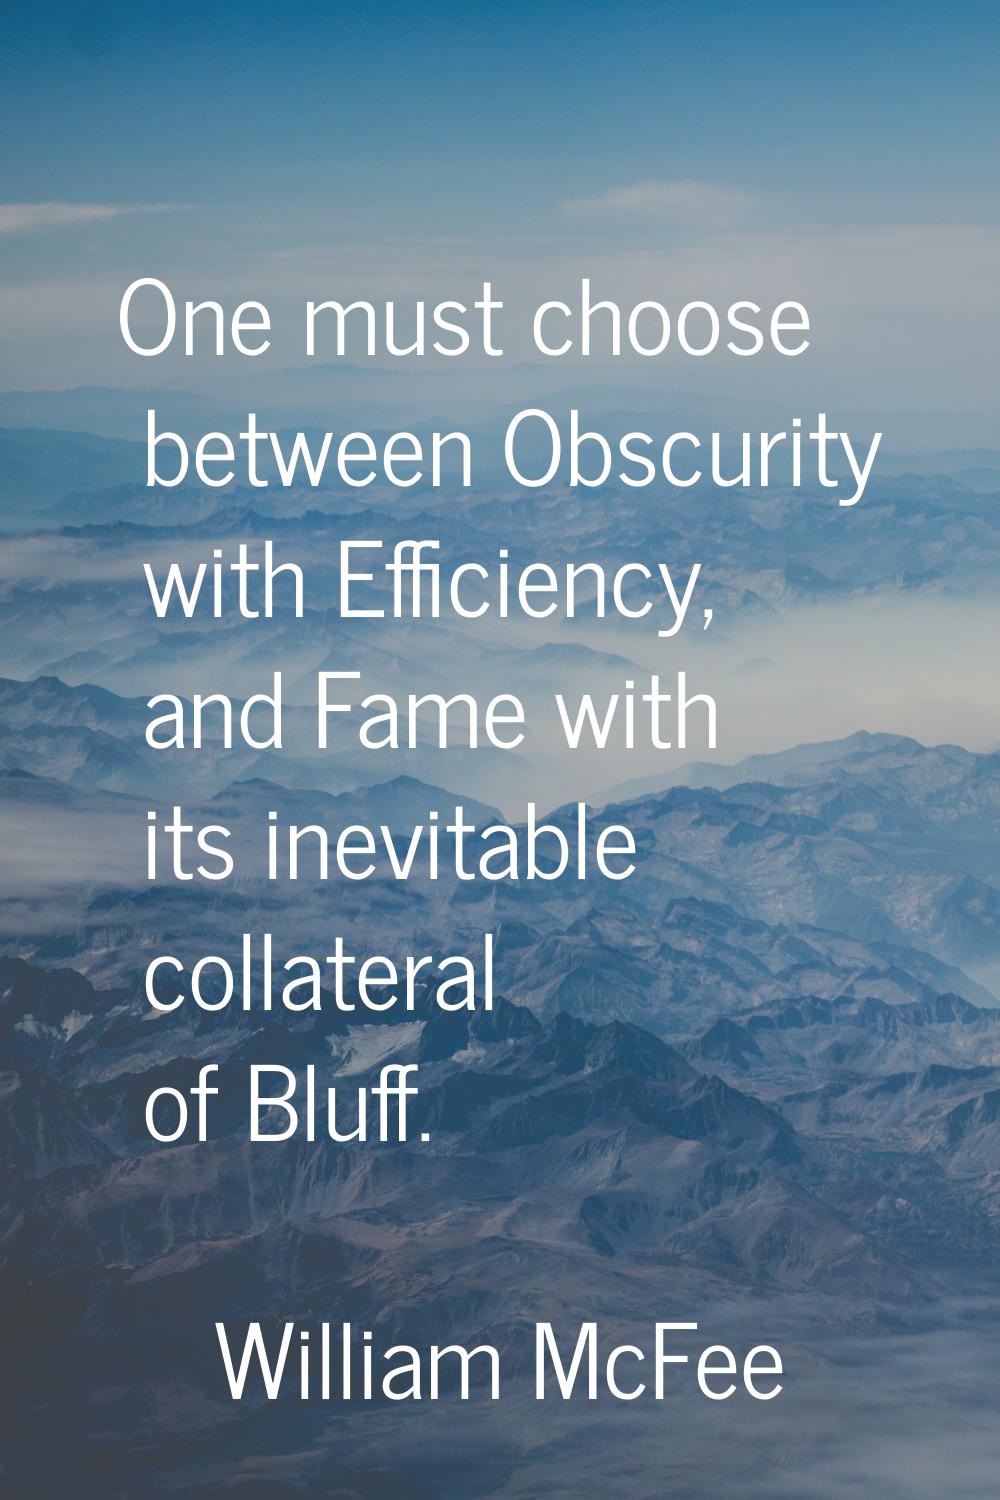 One must choose between Obscurity with Efficiency, and Fame with its inevitable collateral of Bluff